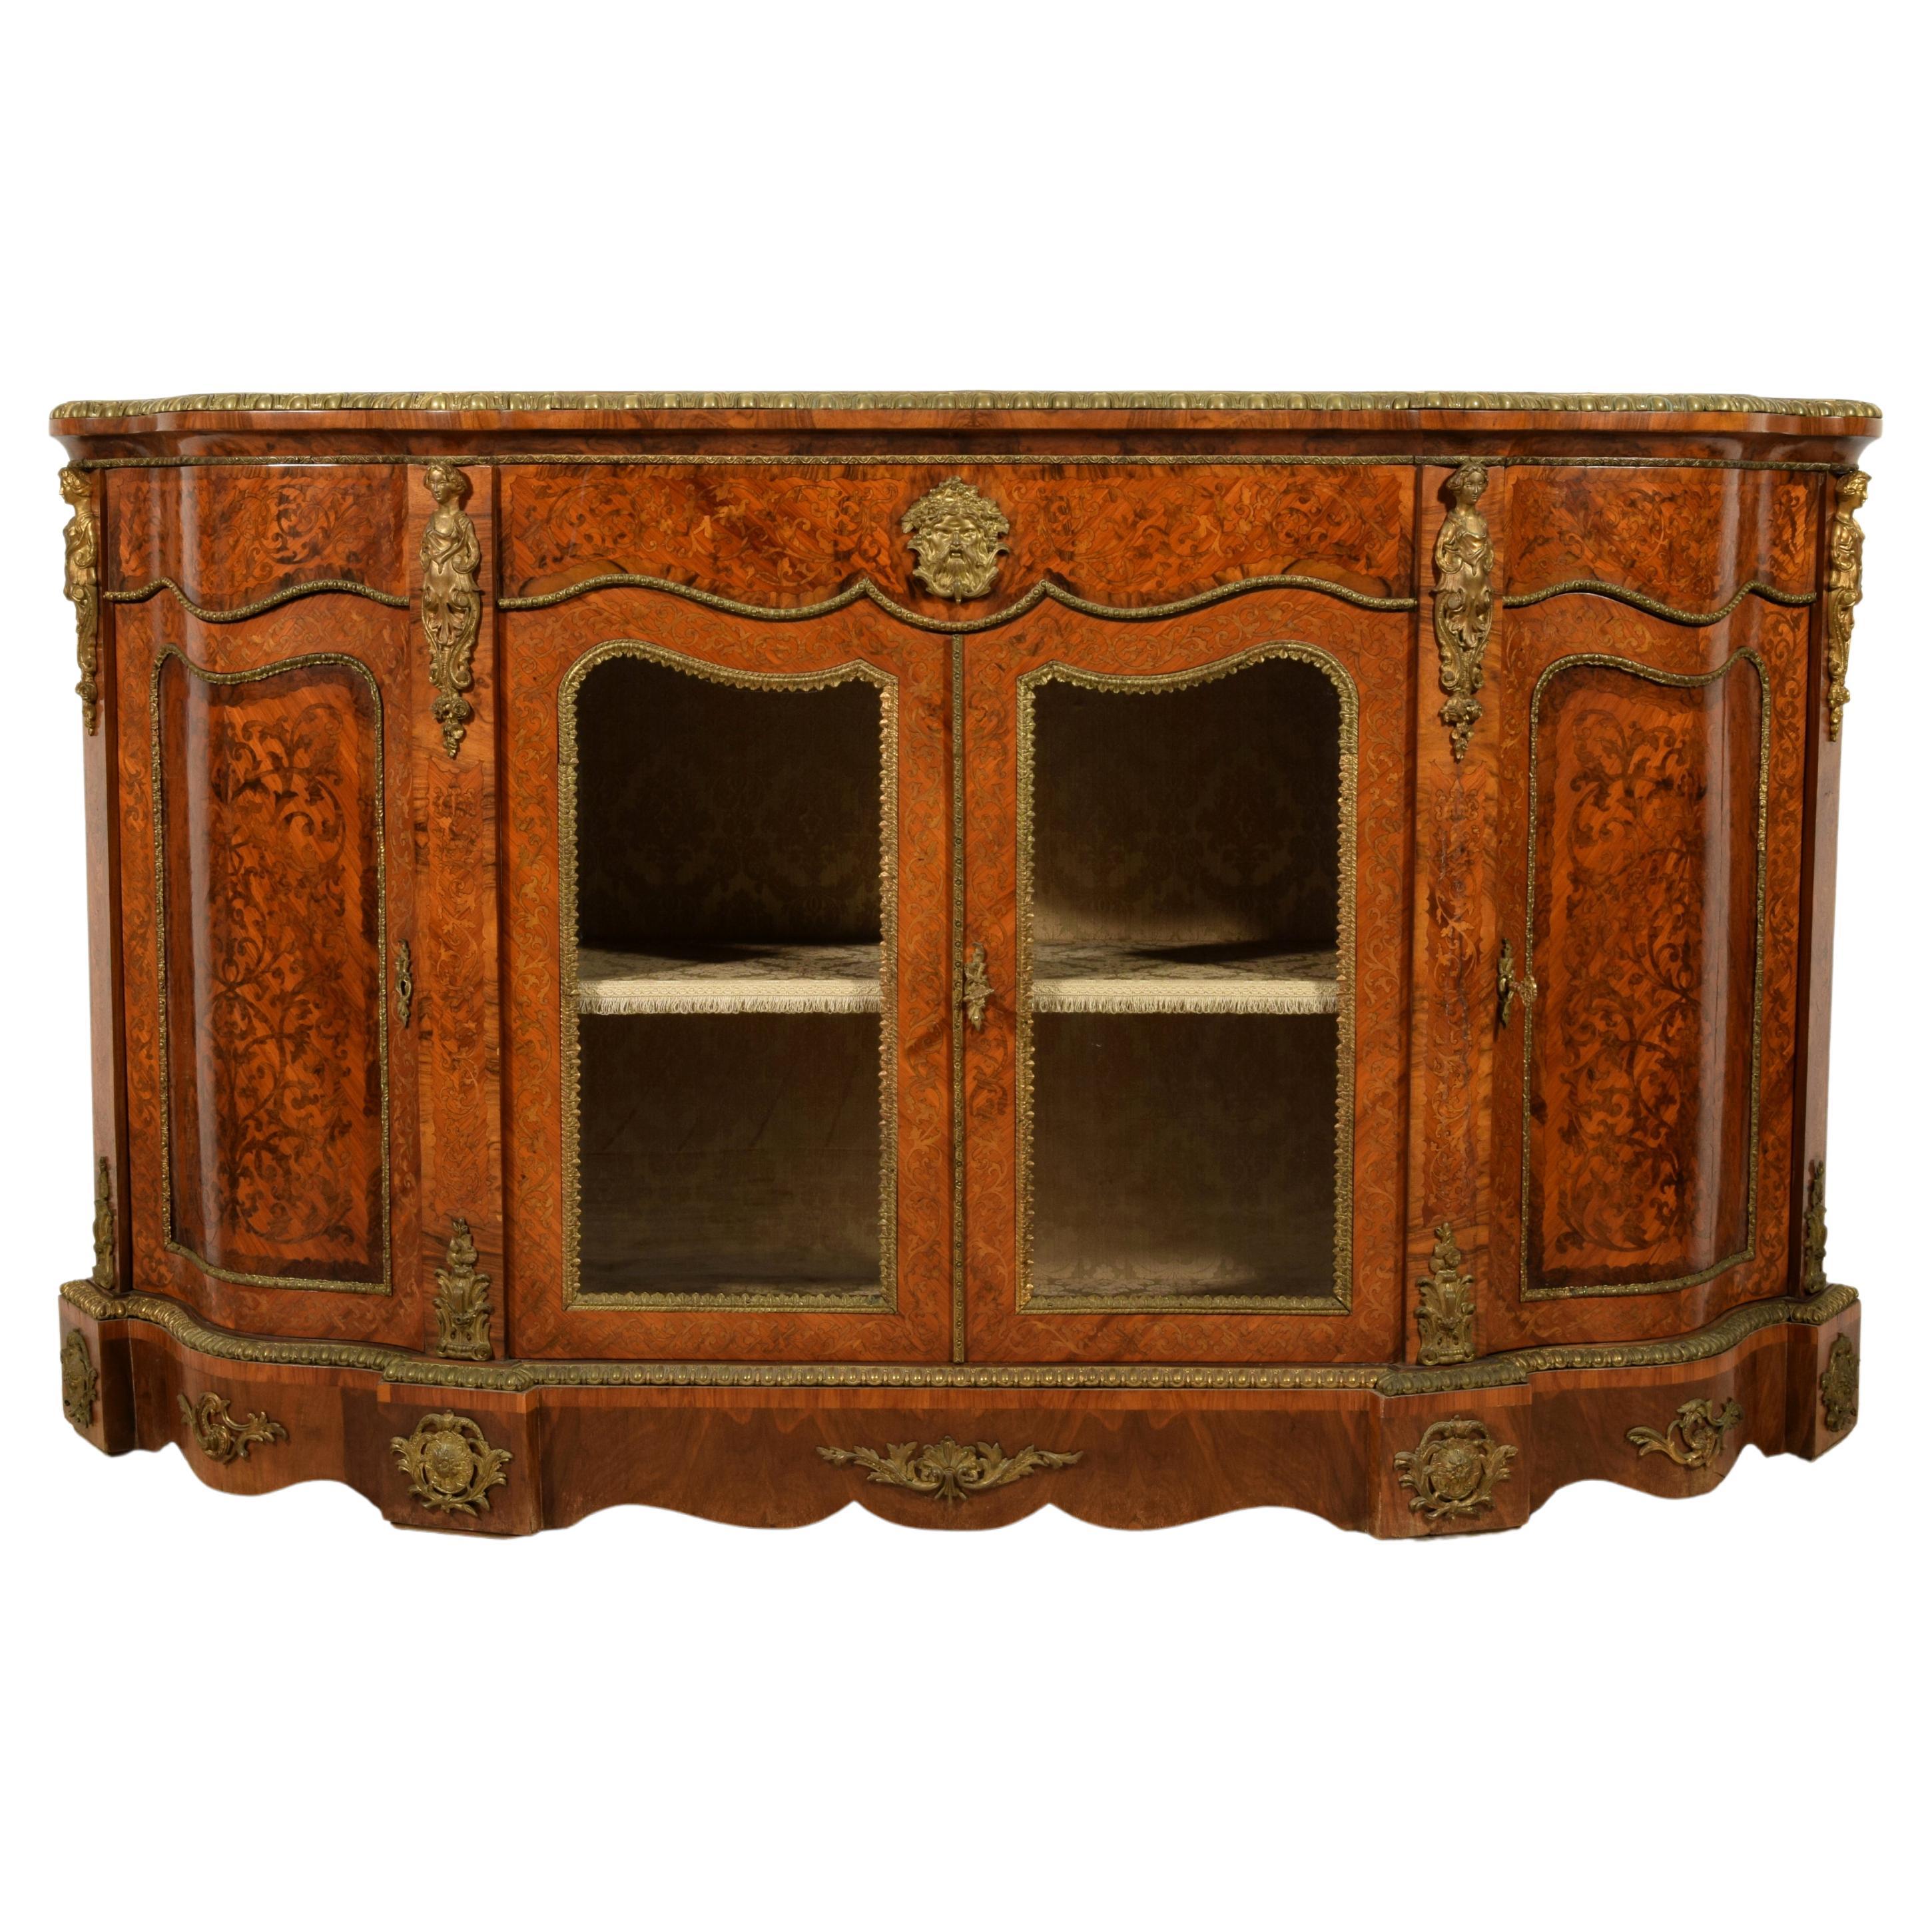 19th Century, English Inlaid Wood Sideboard with Gilt Bronzes